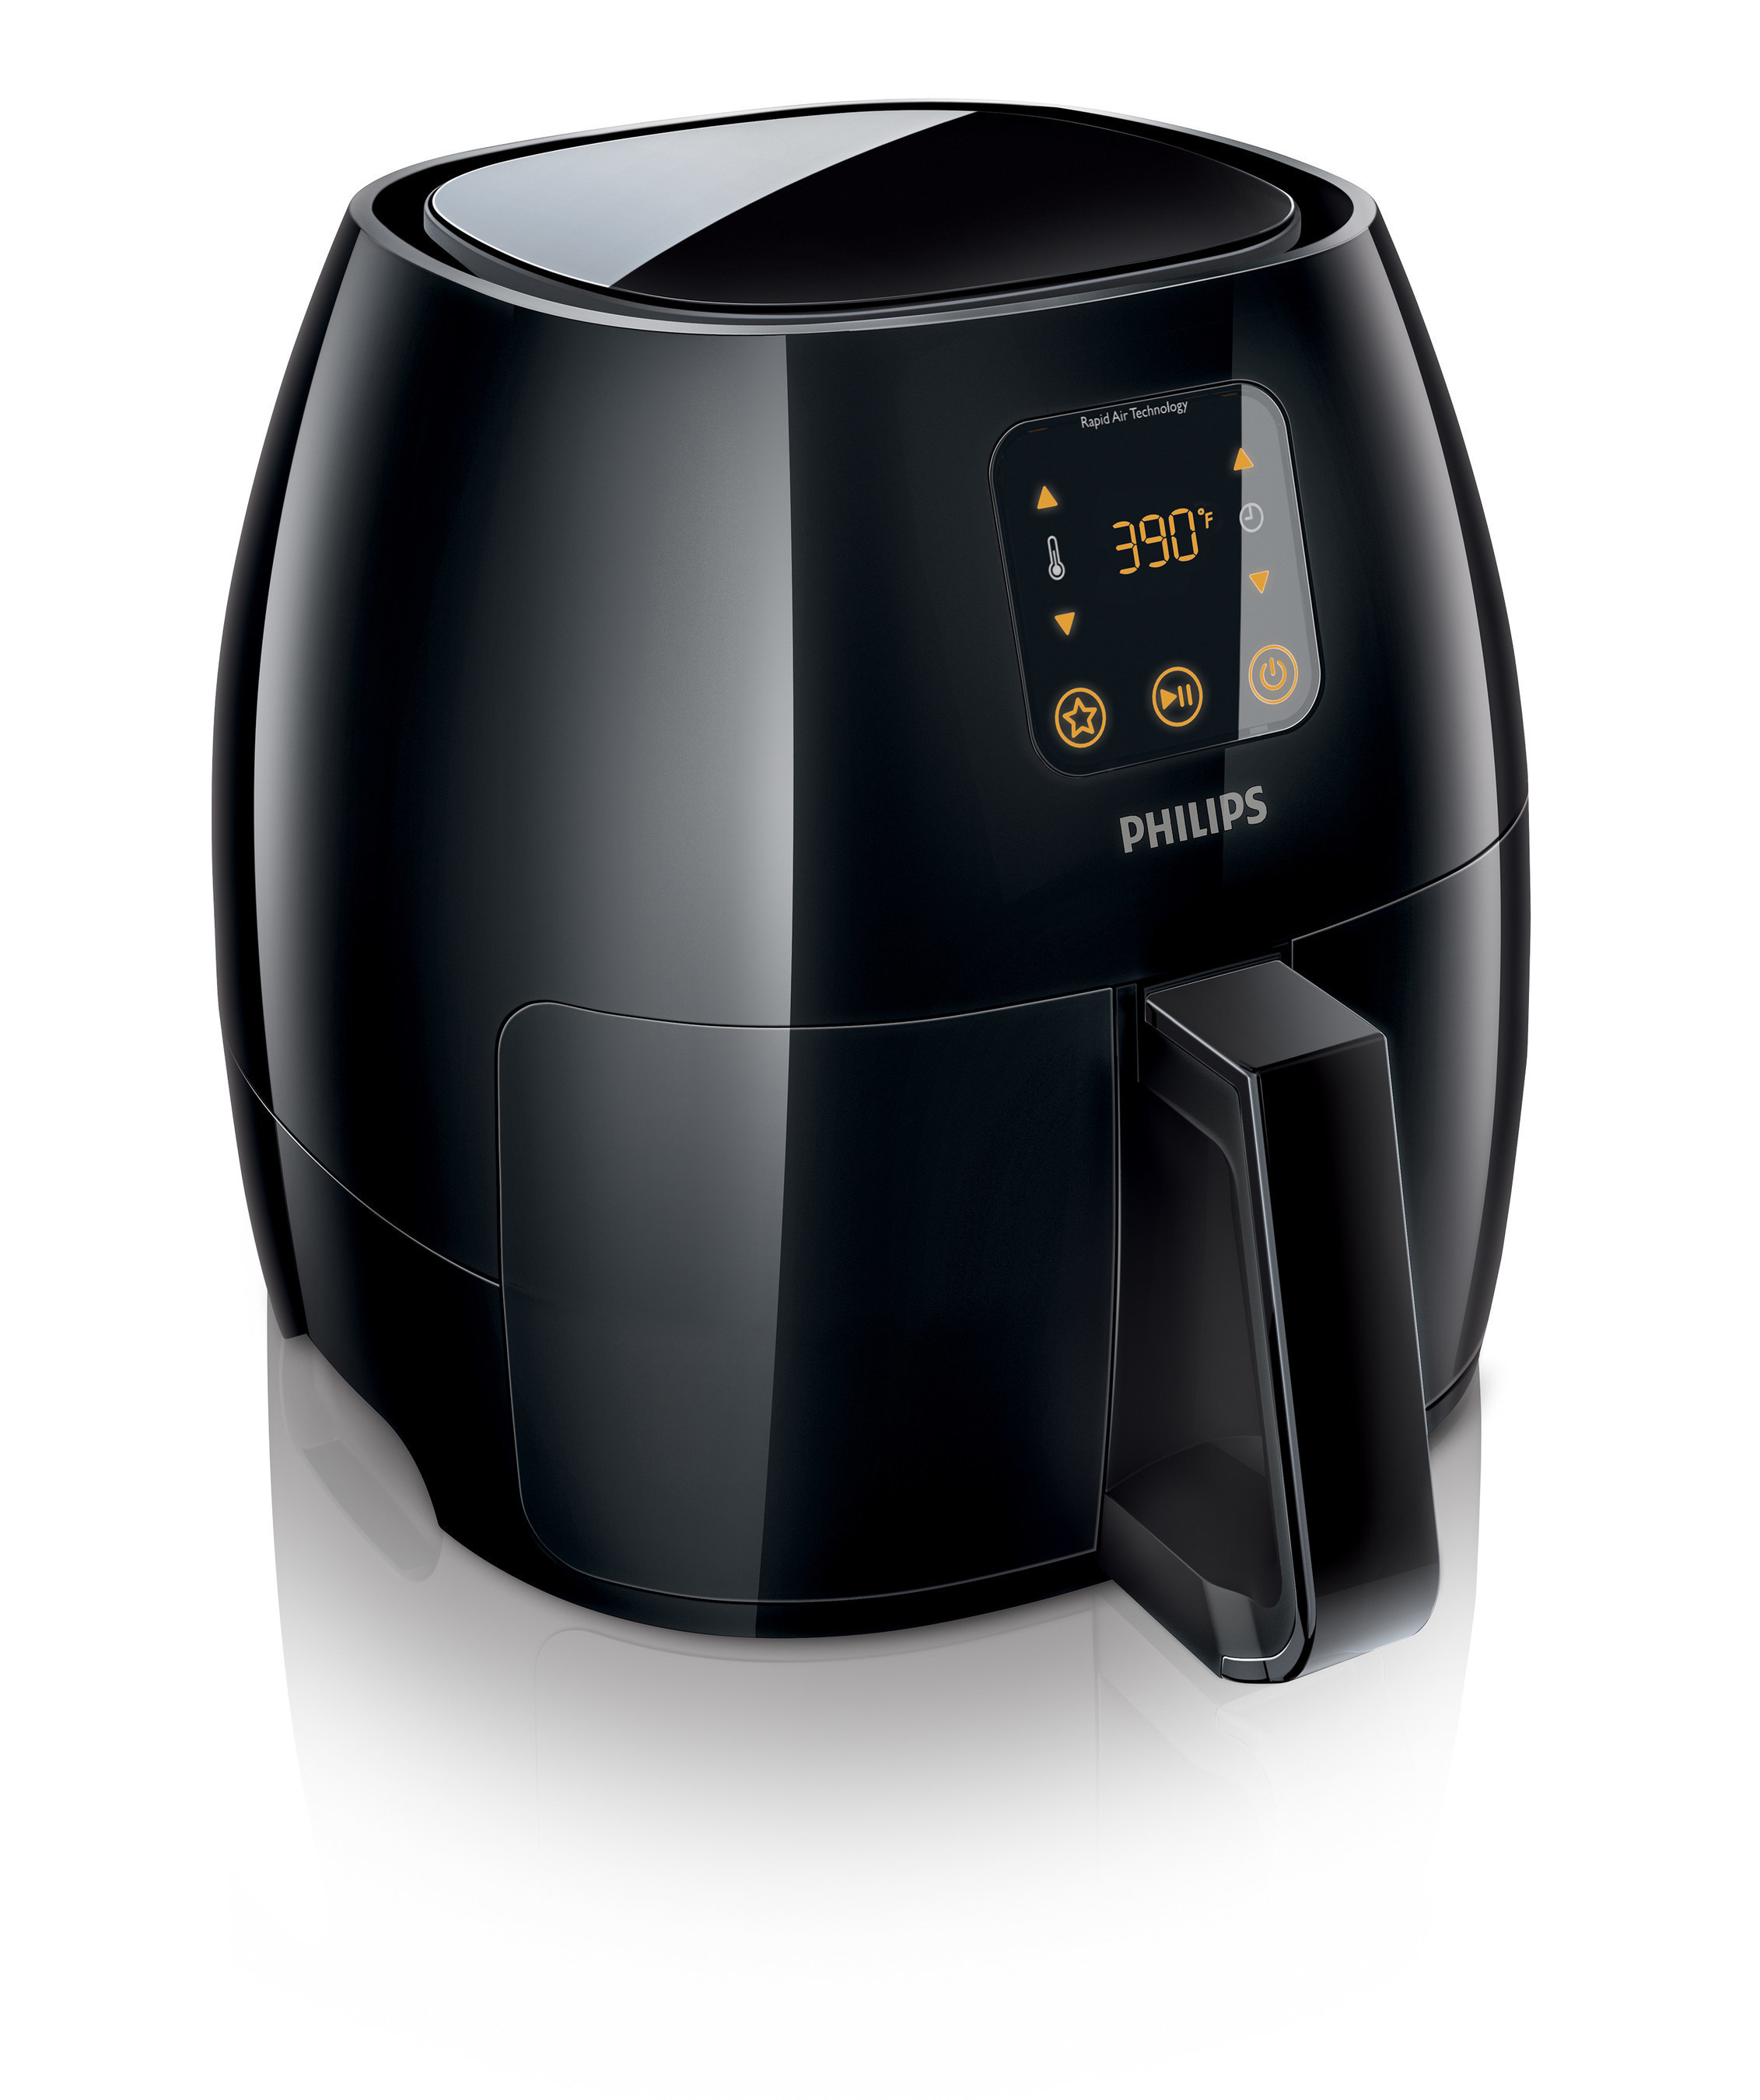 domein Open Sinds Philips Launches Smart, Innovative Kitchen Appliances to Create Delicious,  Healthy Meals at Home